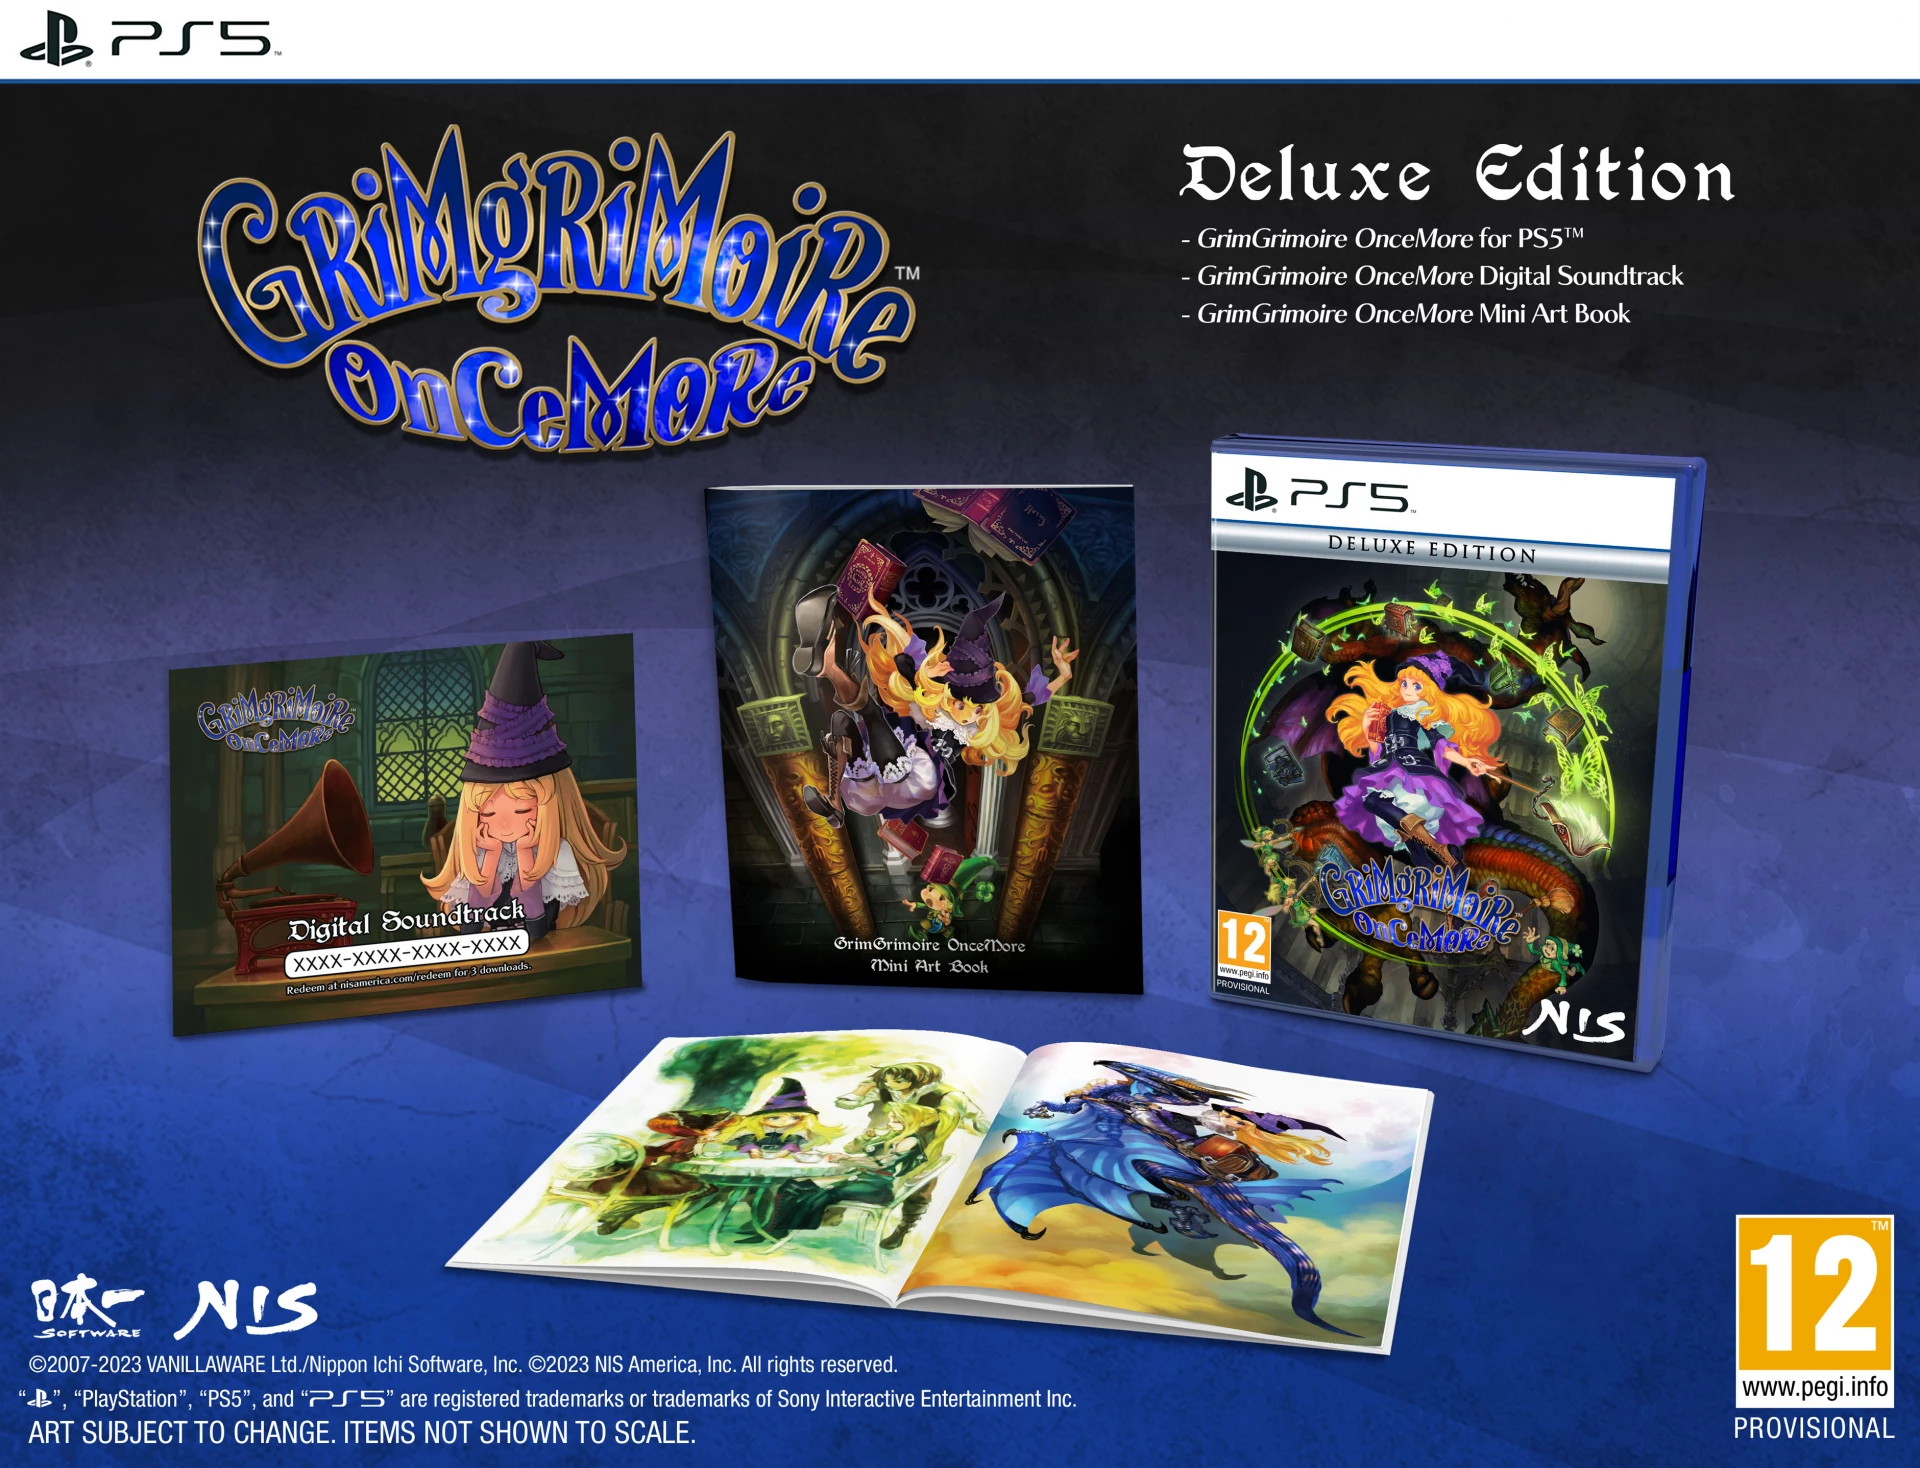 GrimGrimoire OnceMore - Deluxe Edition (PS5), NIS America